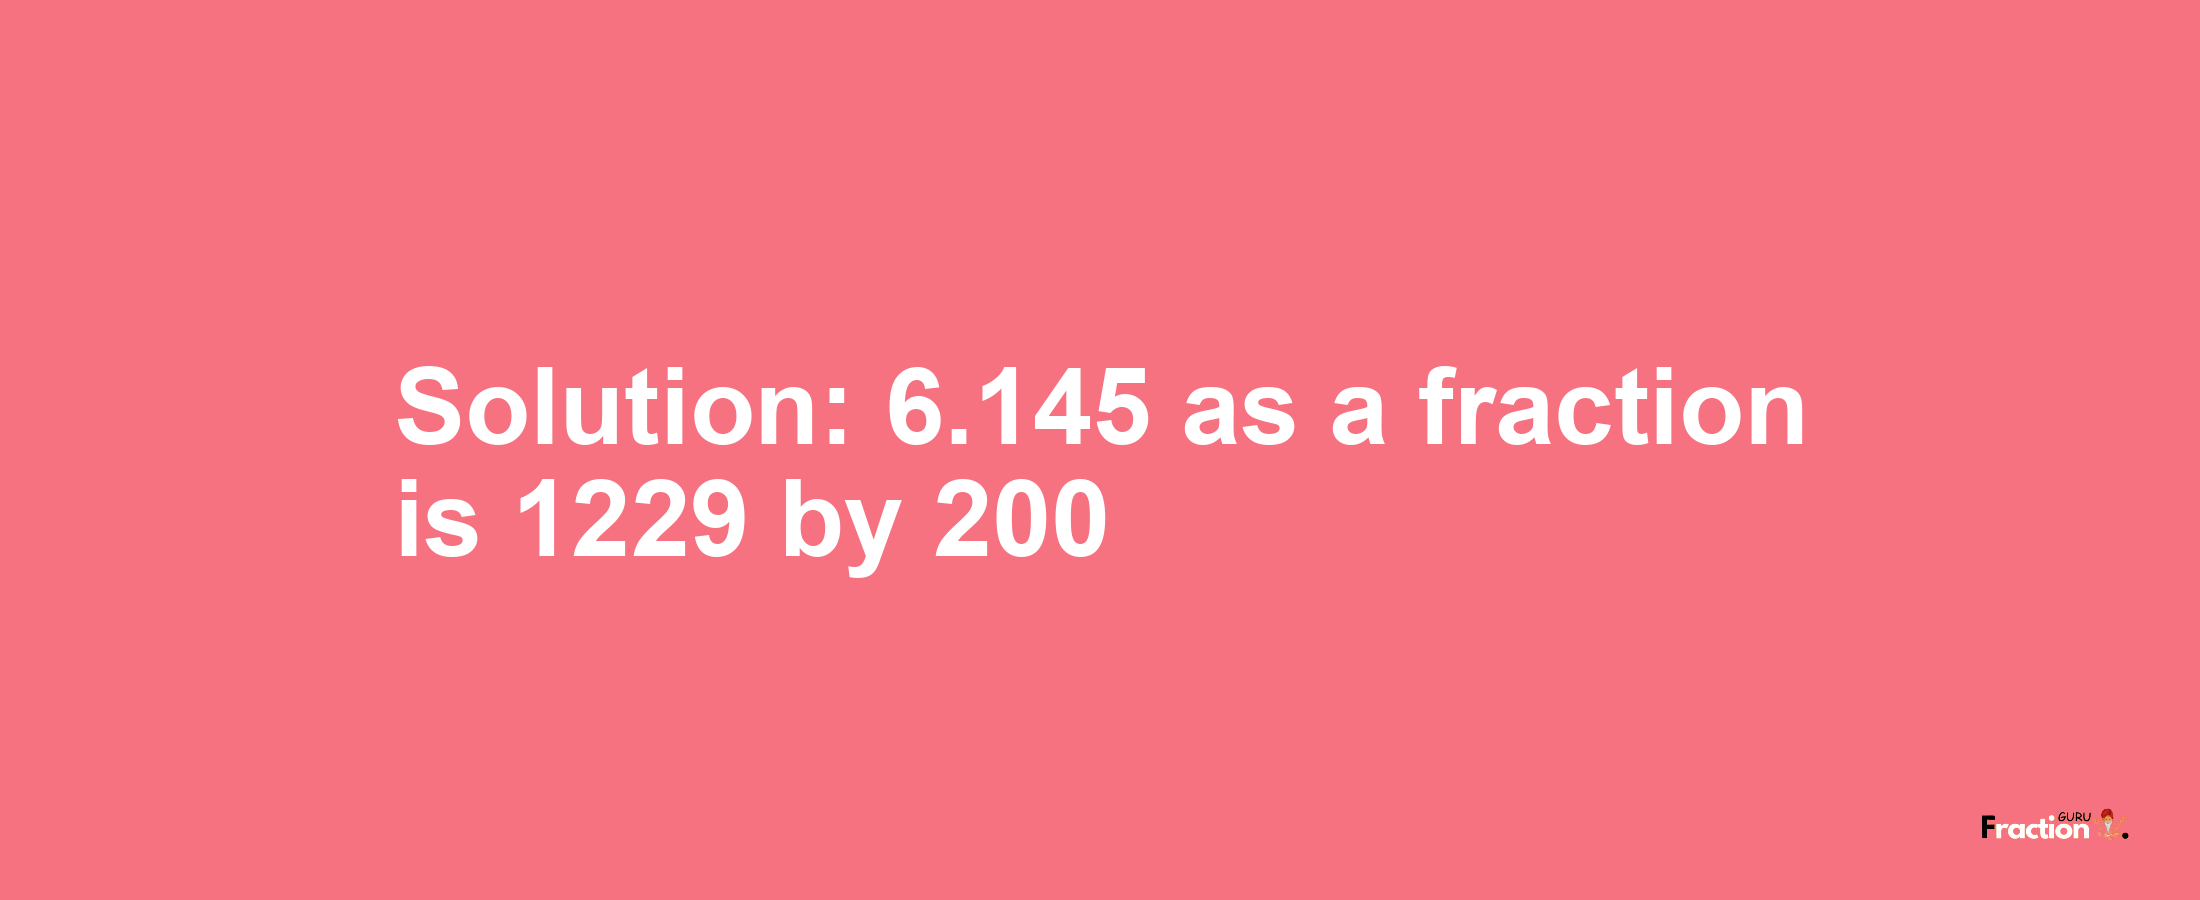 Solution:6.145 as a fraction is 1229/200